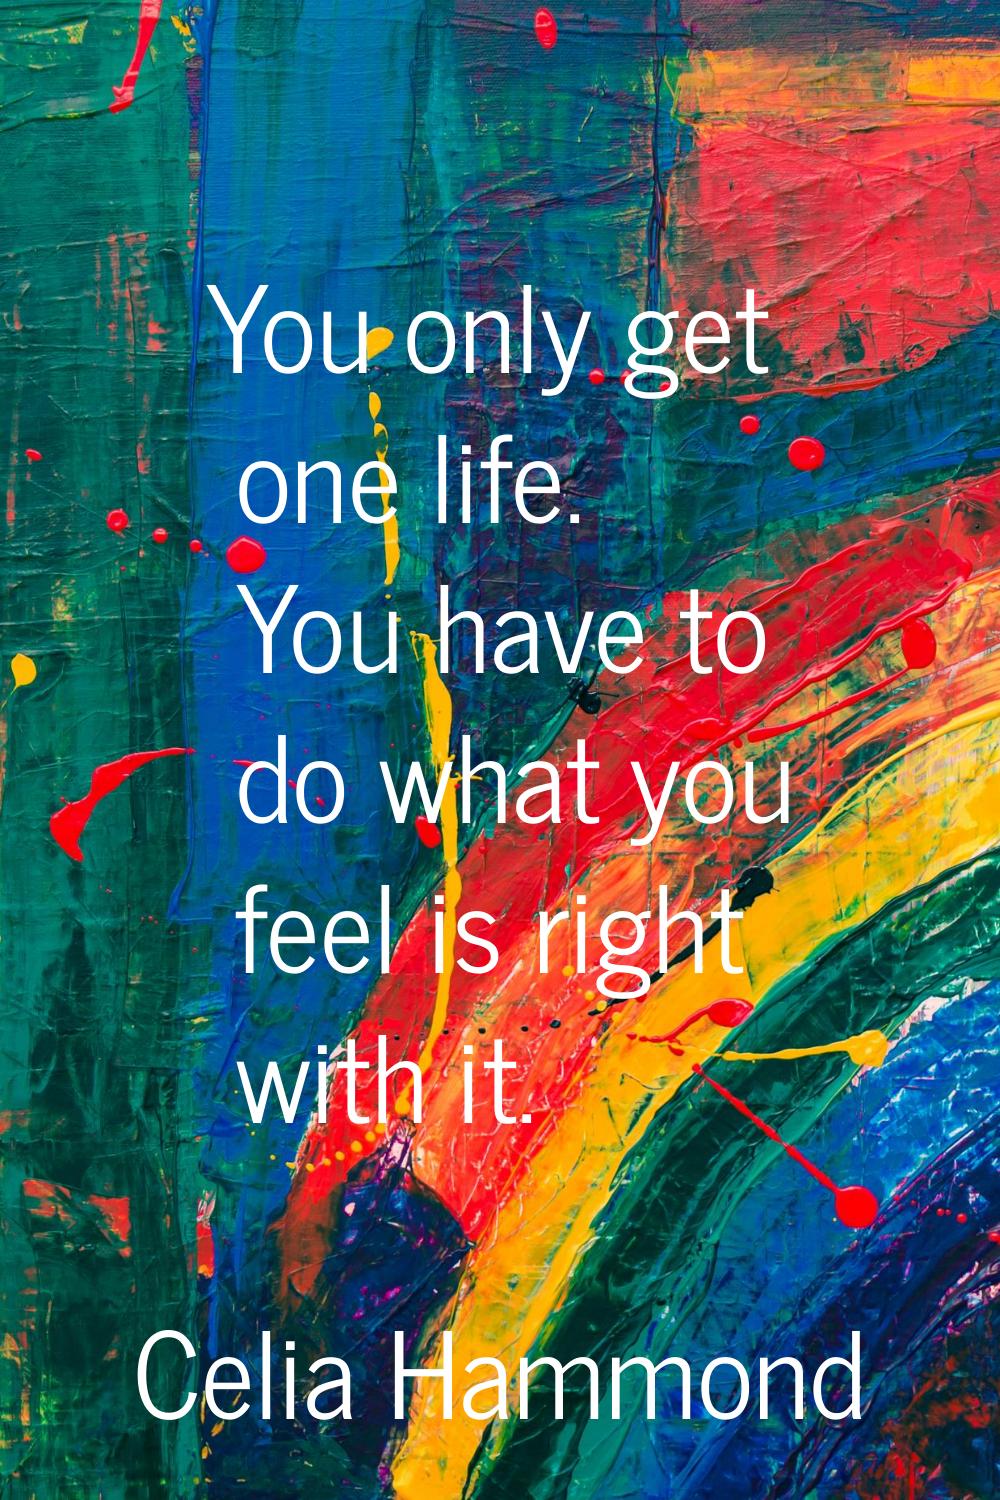 You only get one life. You have to do what you feel is right with it.